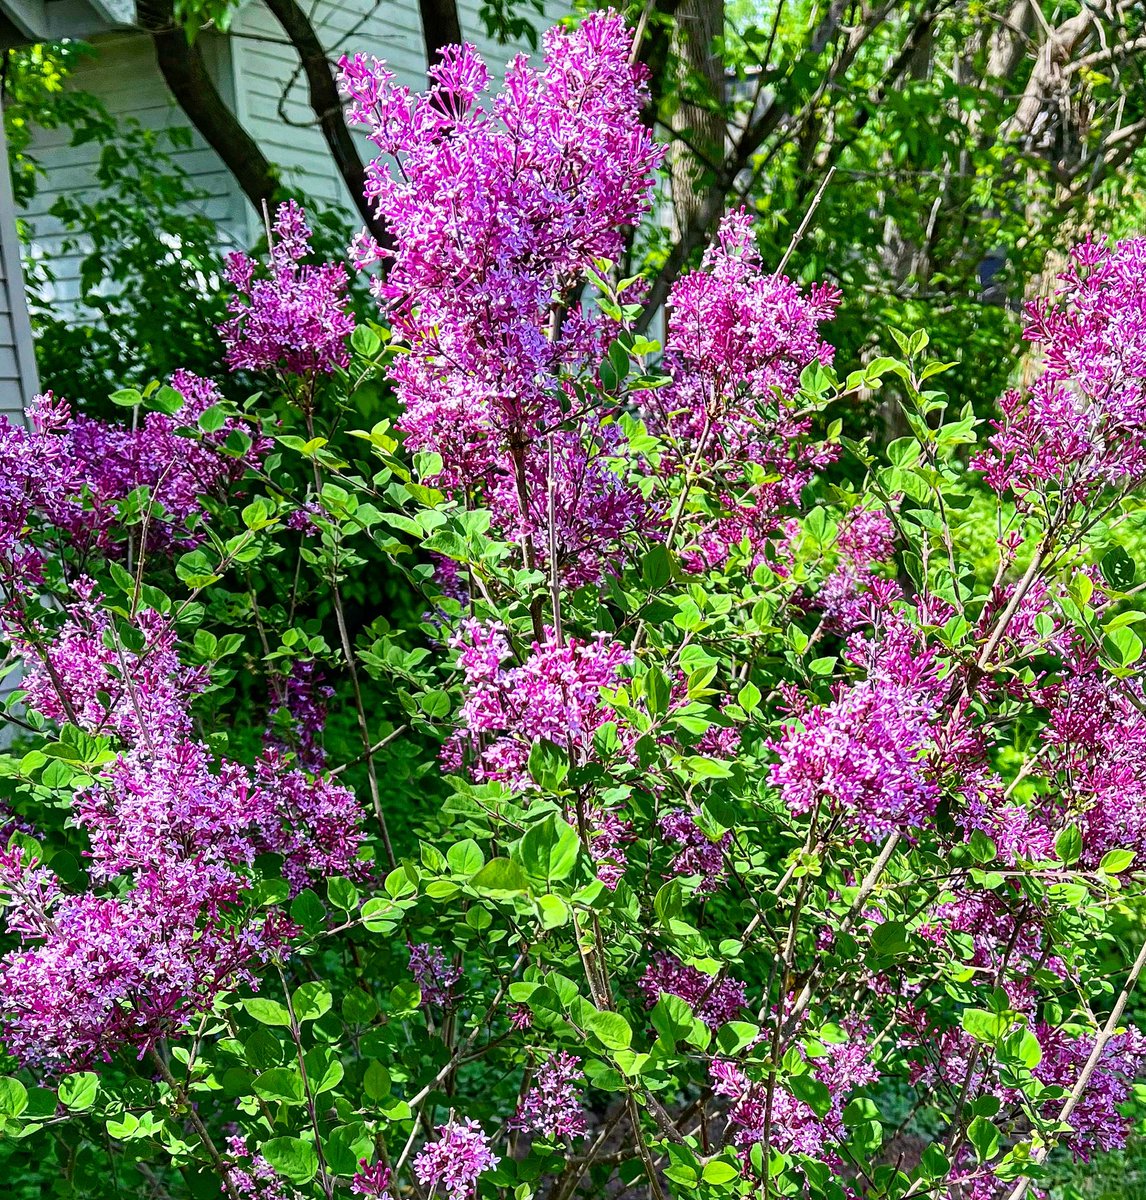 Lilacs are finally starting to bloom! Can’t quite smell them yet though. #lilac #lilacs #lilacseason #spring #springlilacs #flowers #purpleflowers #lilacflowers #gardening #gardener #backyardgarden